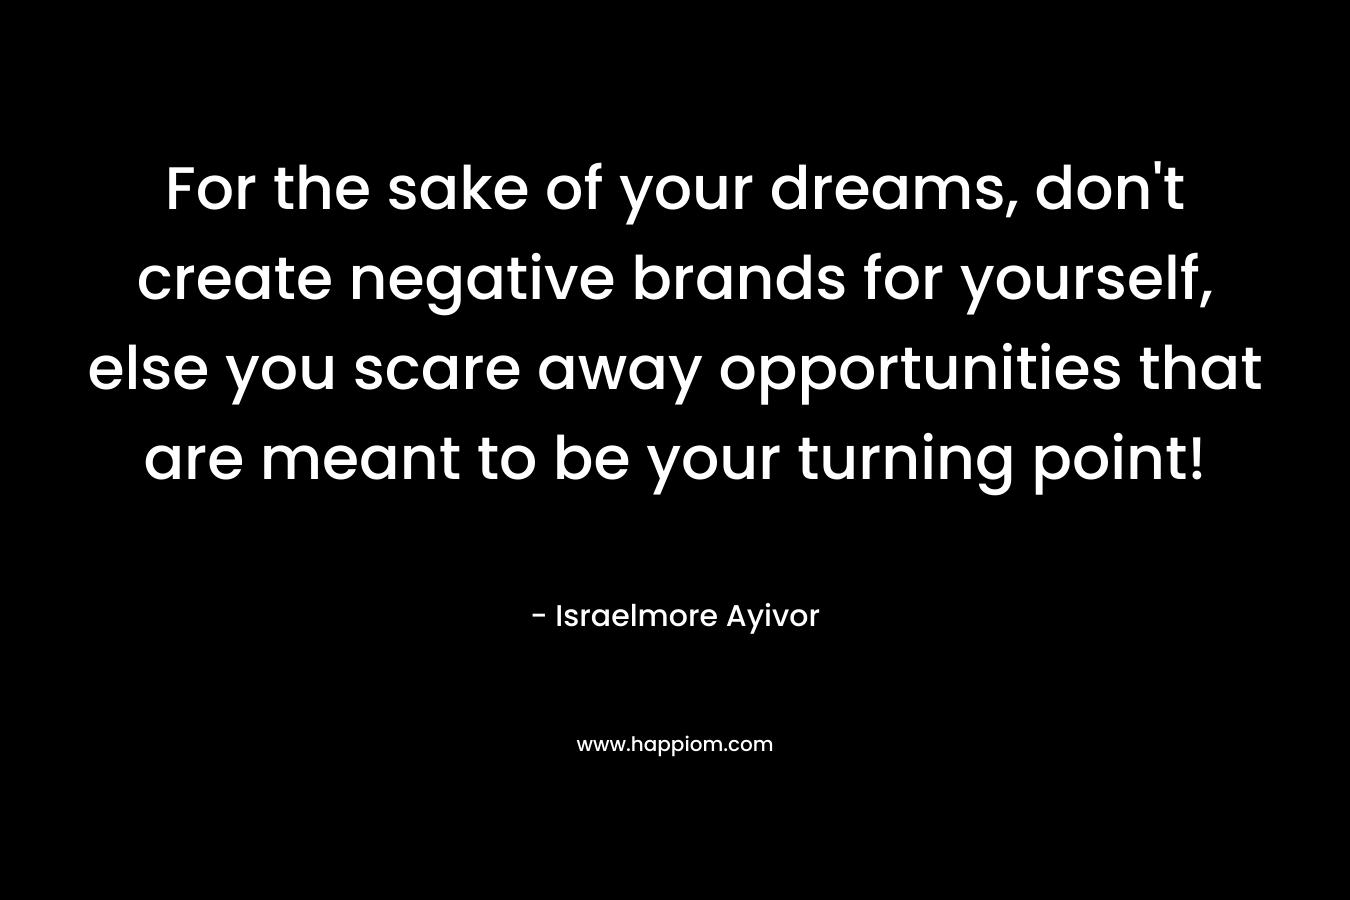 For the sake of your dreams, don't create negative brands for yourself, else you scare away opportunities that are meant to be your turning point!